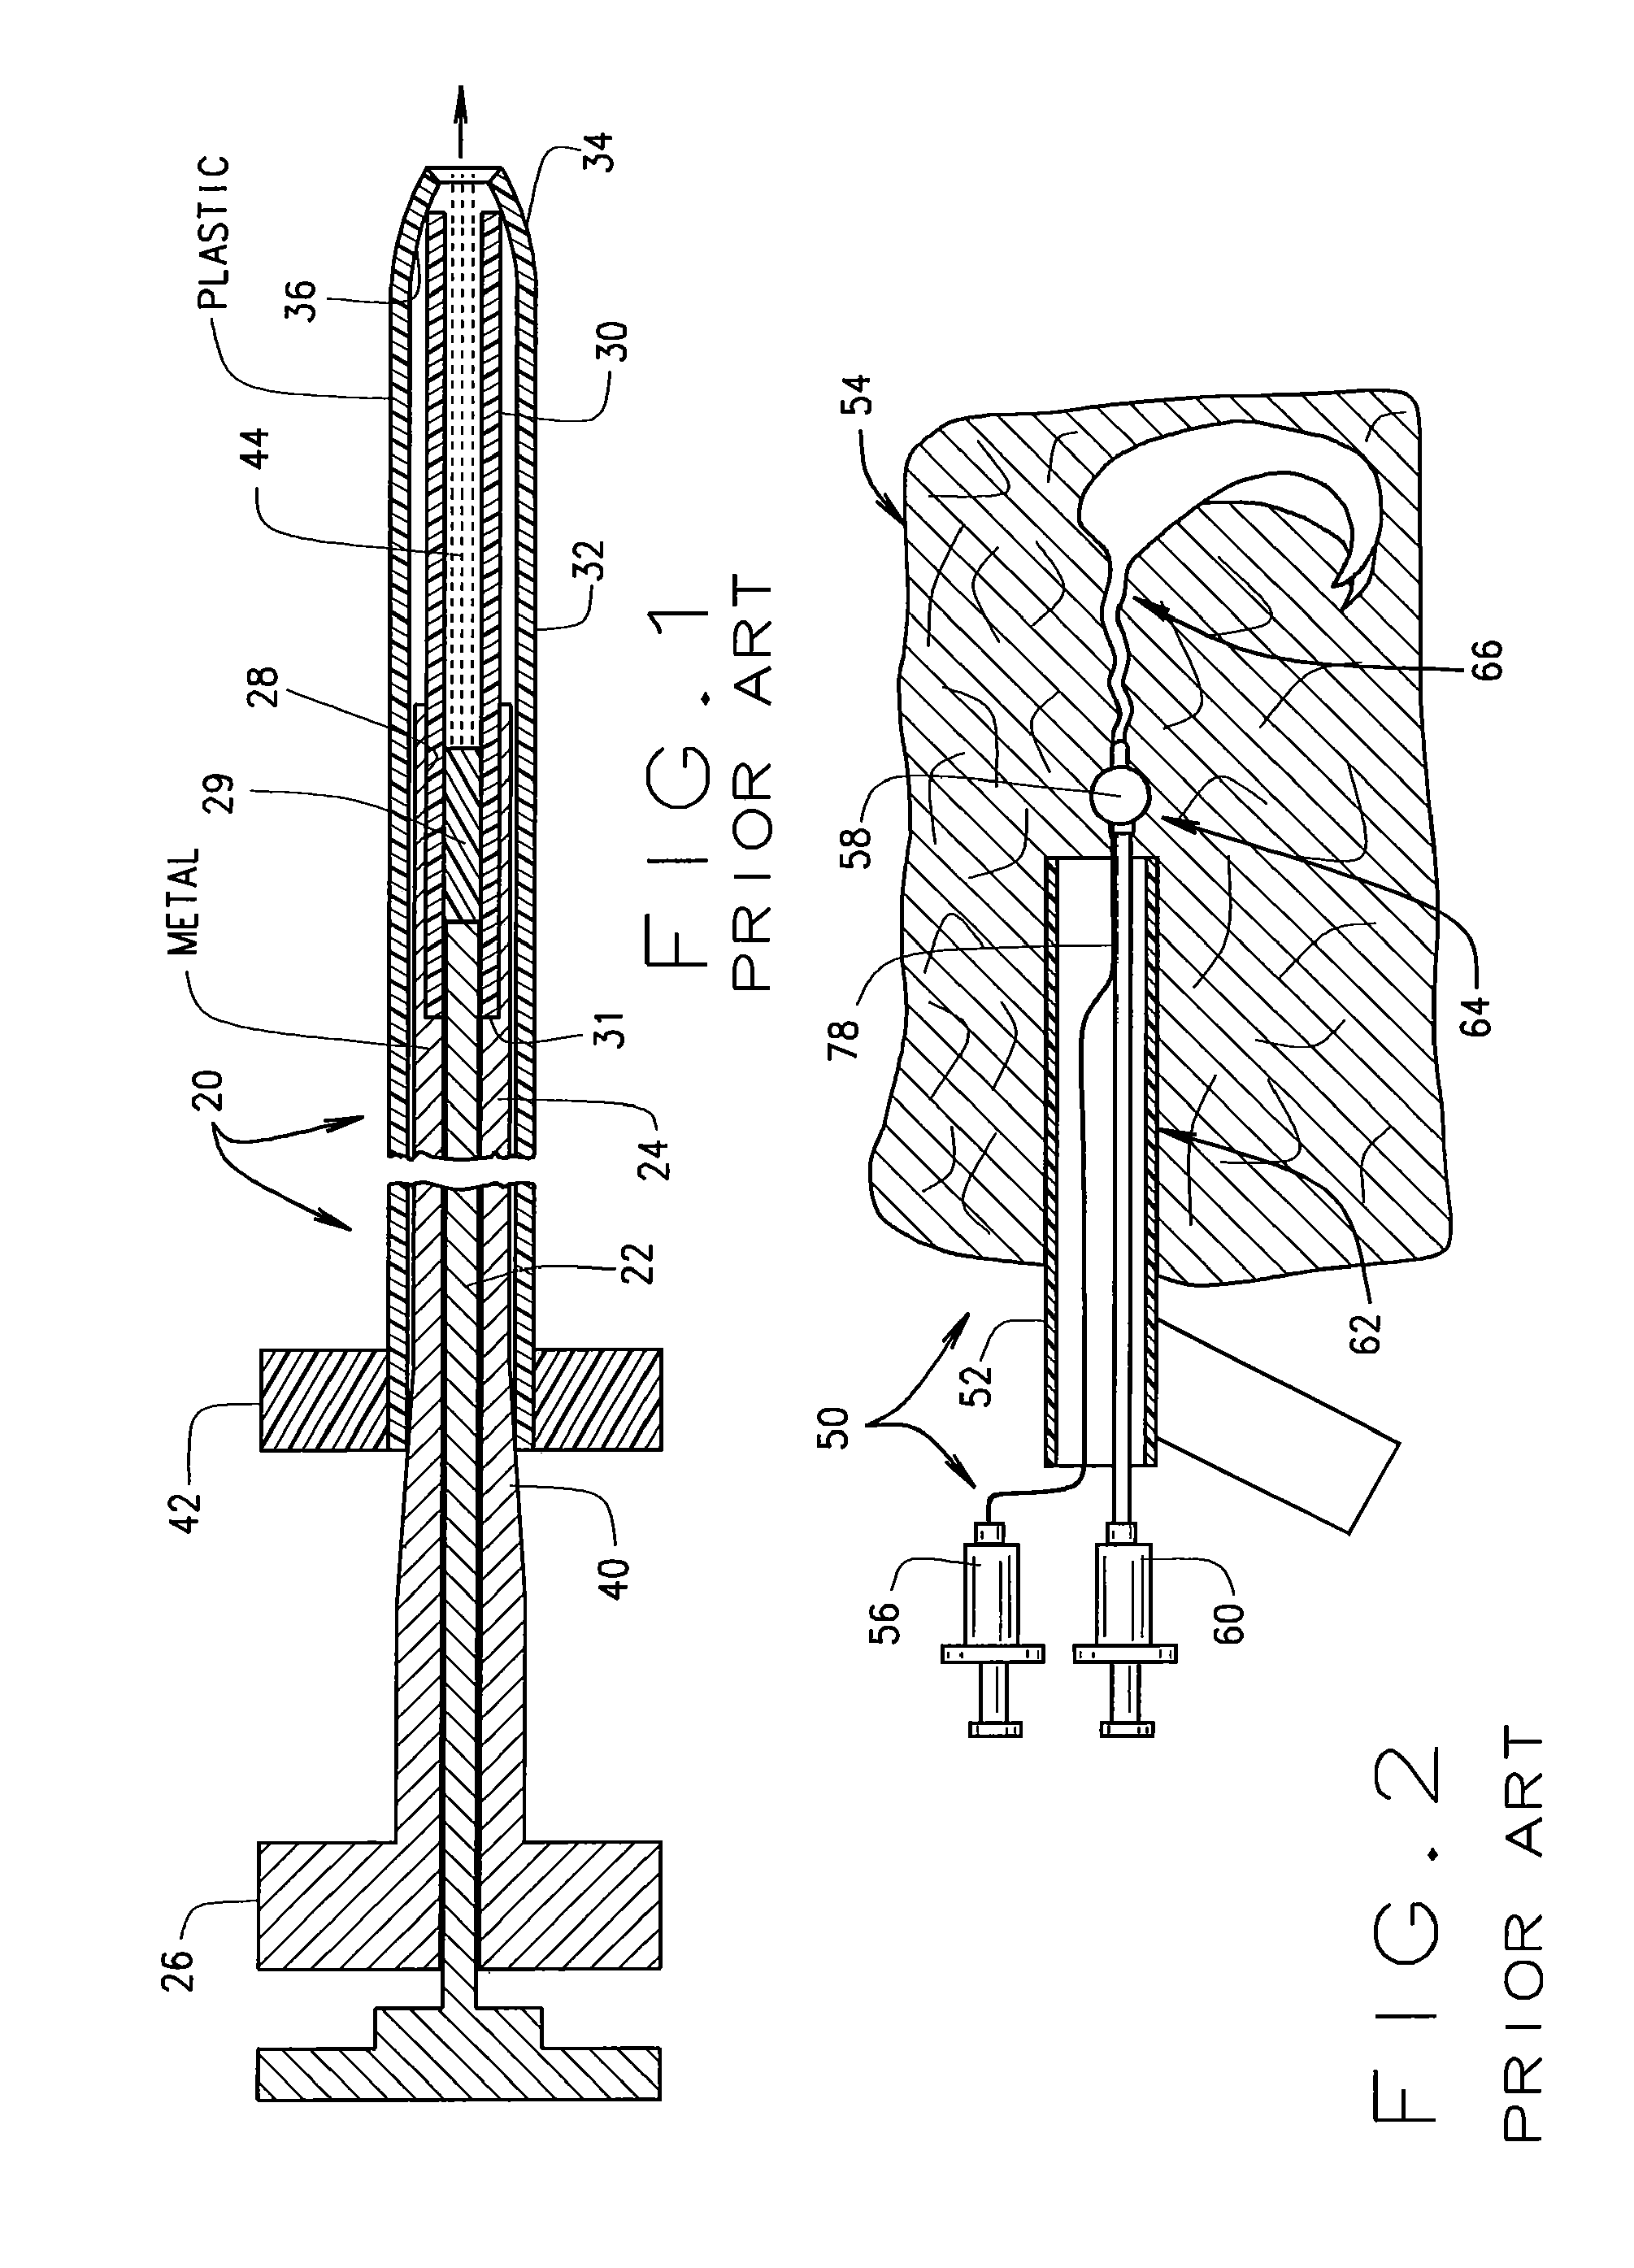 Method and apparatus to reduce the number of sperm used in artificial insemination of cattle